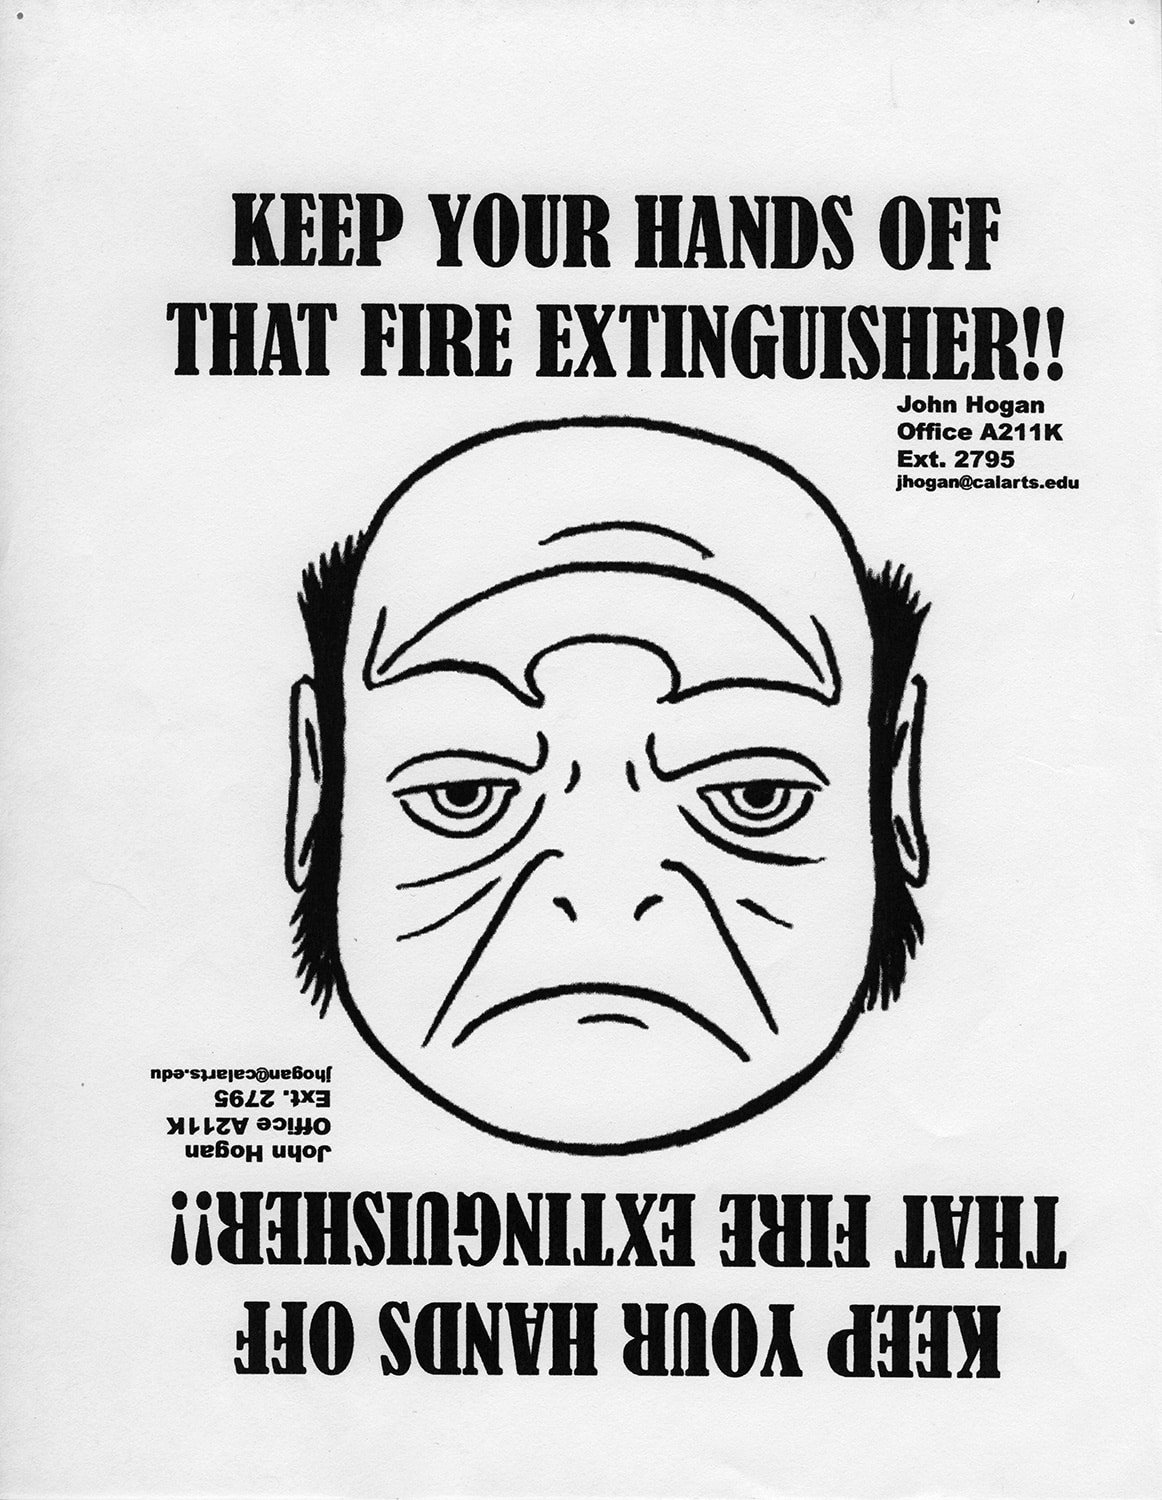 Upside down picture with the text 'Keep your hands off that fire extinguisher!!' on the top and also upside down on the bottom